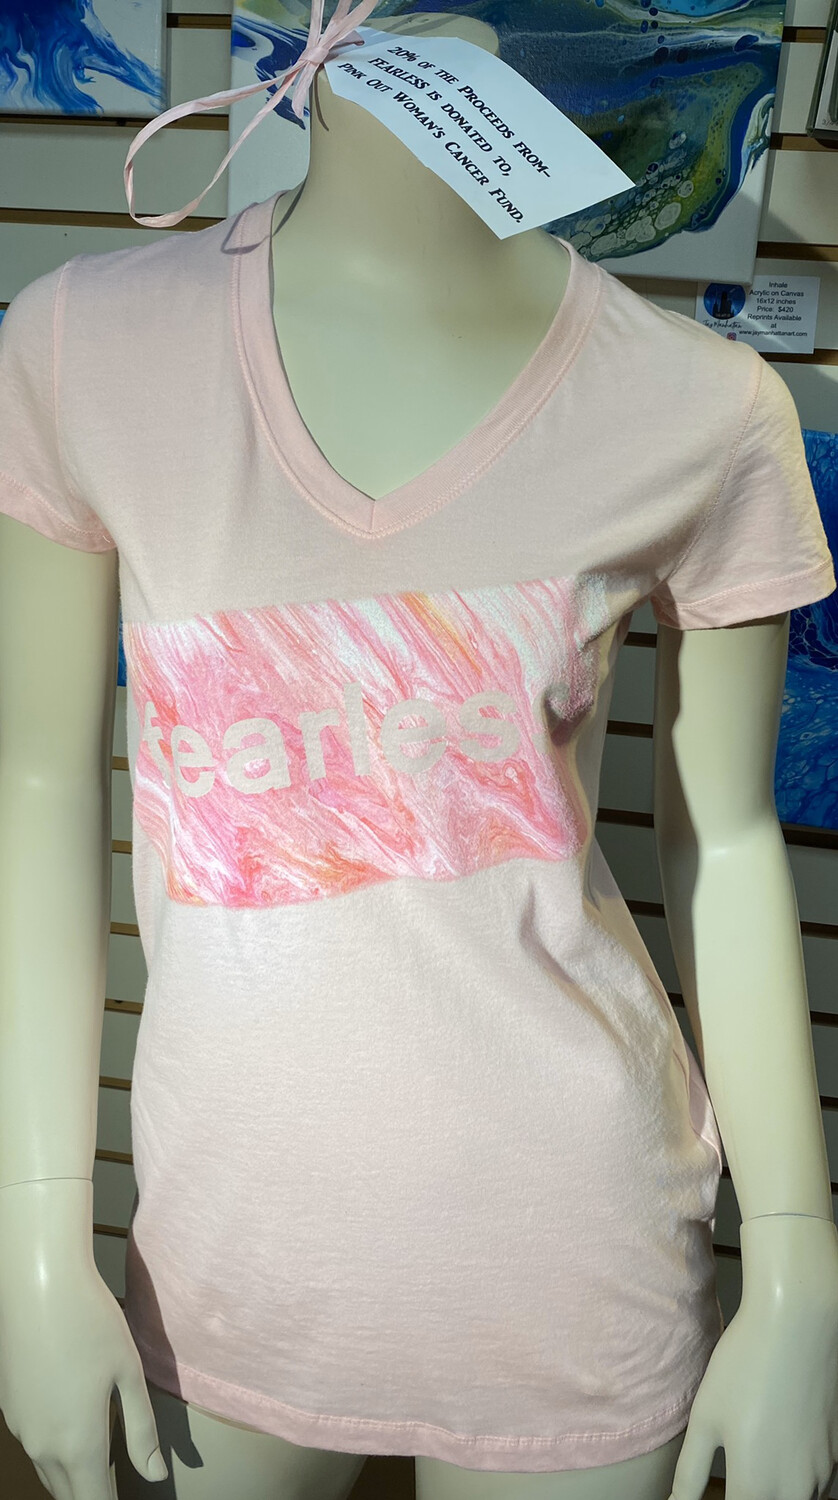 Fearless Pink Woman’s V Neck T Small Pictured. 20% Donated To Pink Out. Tap For Size.